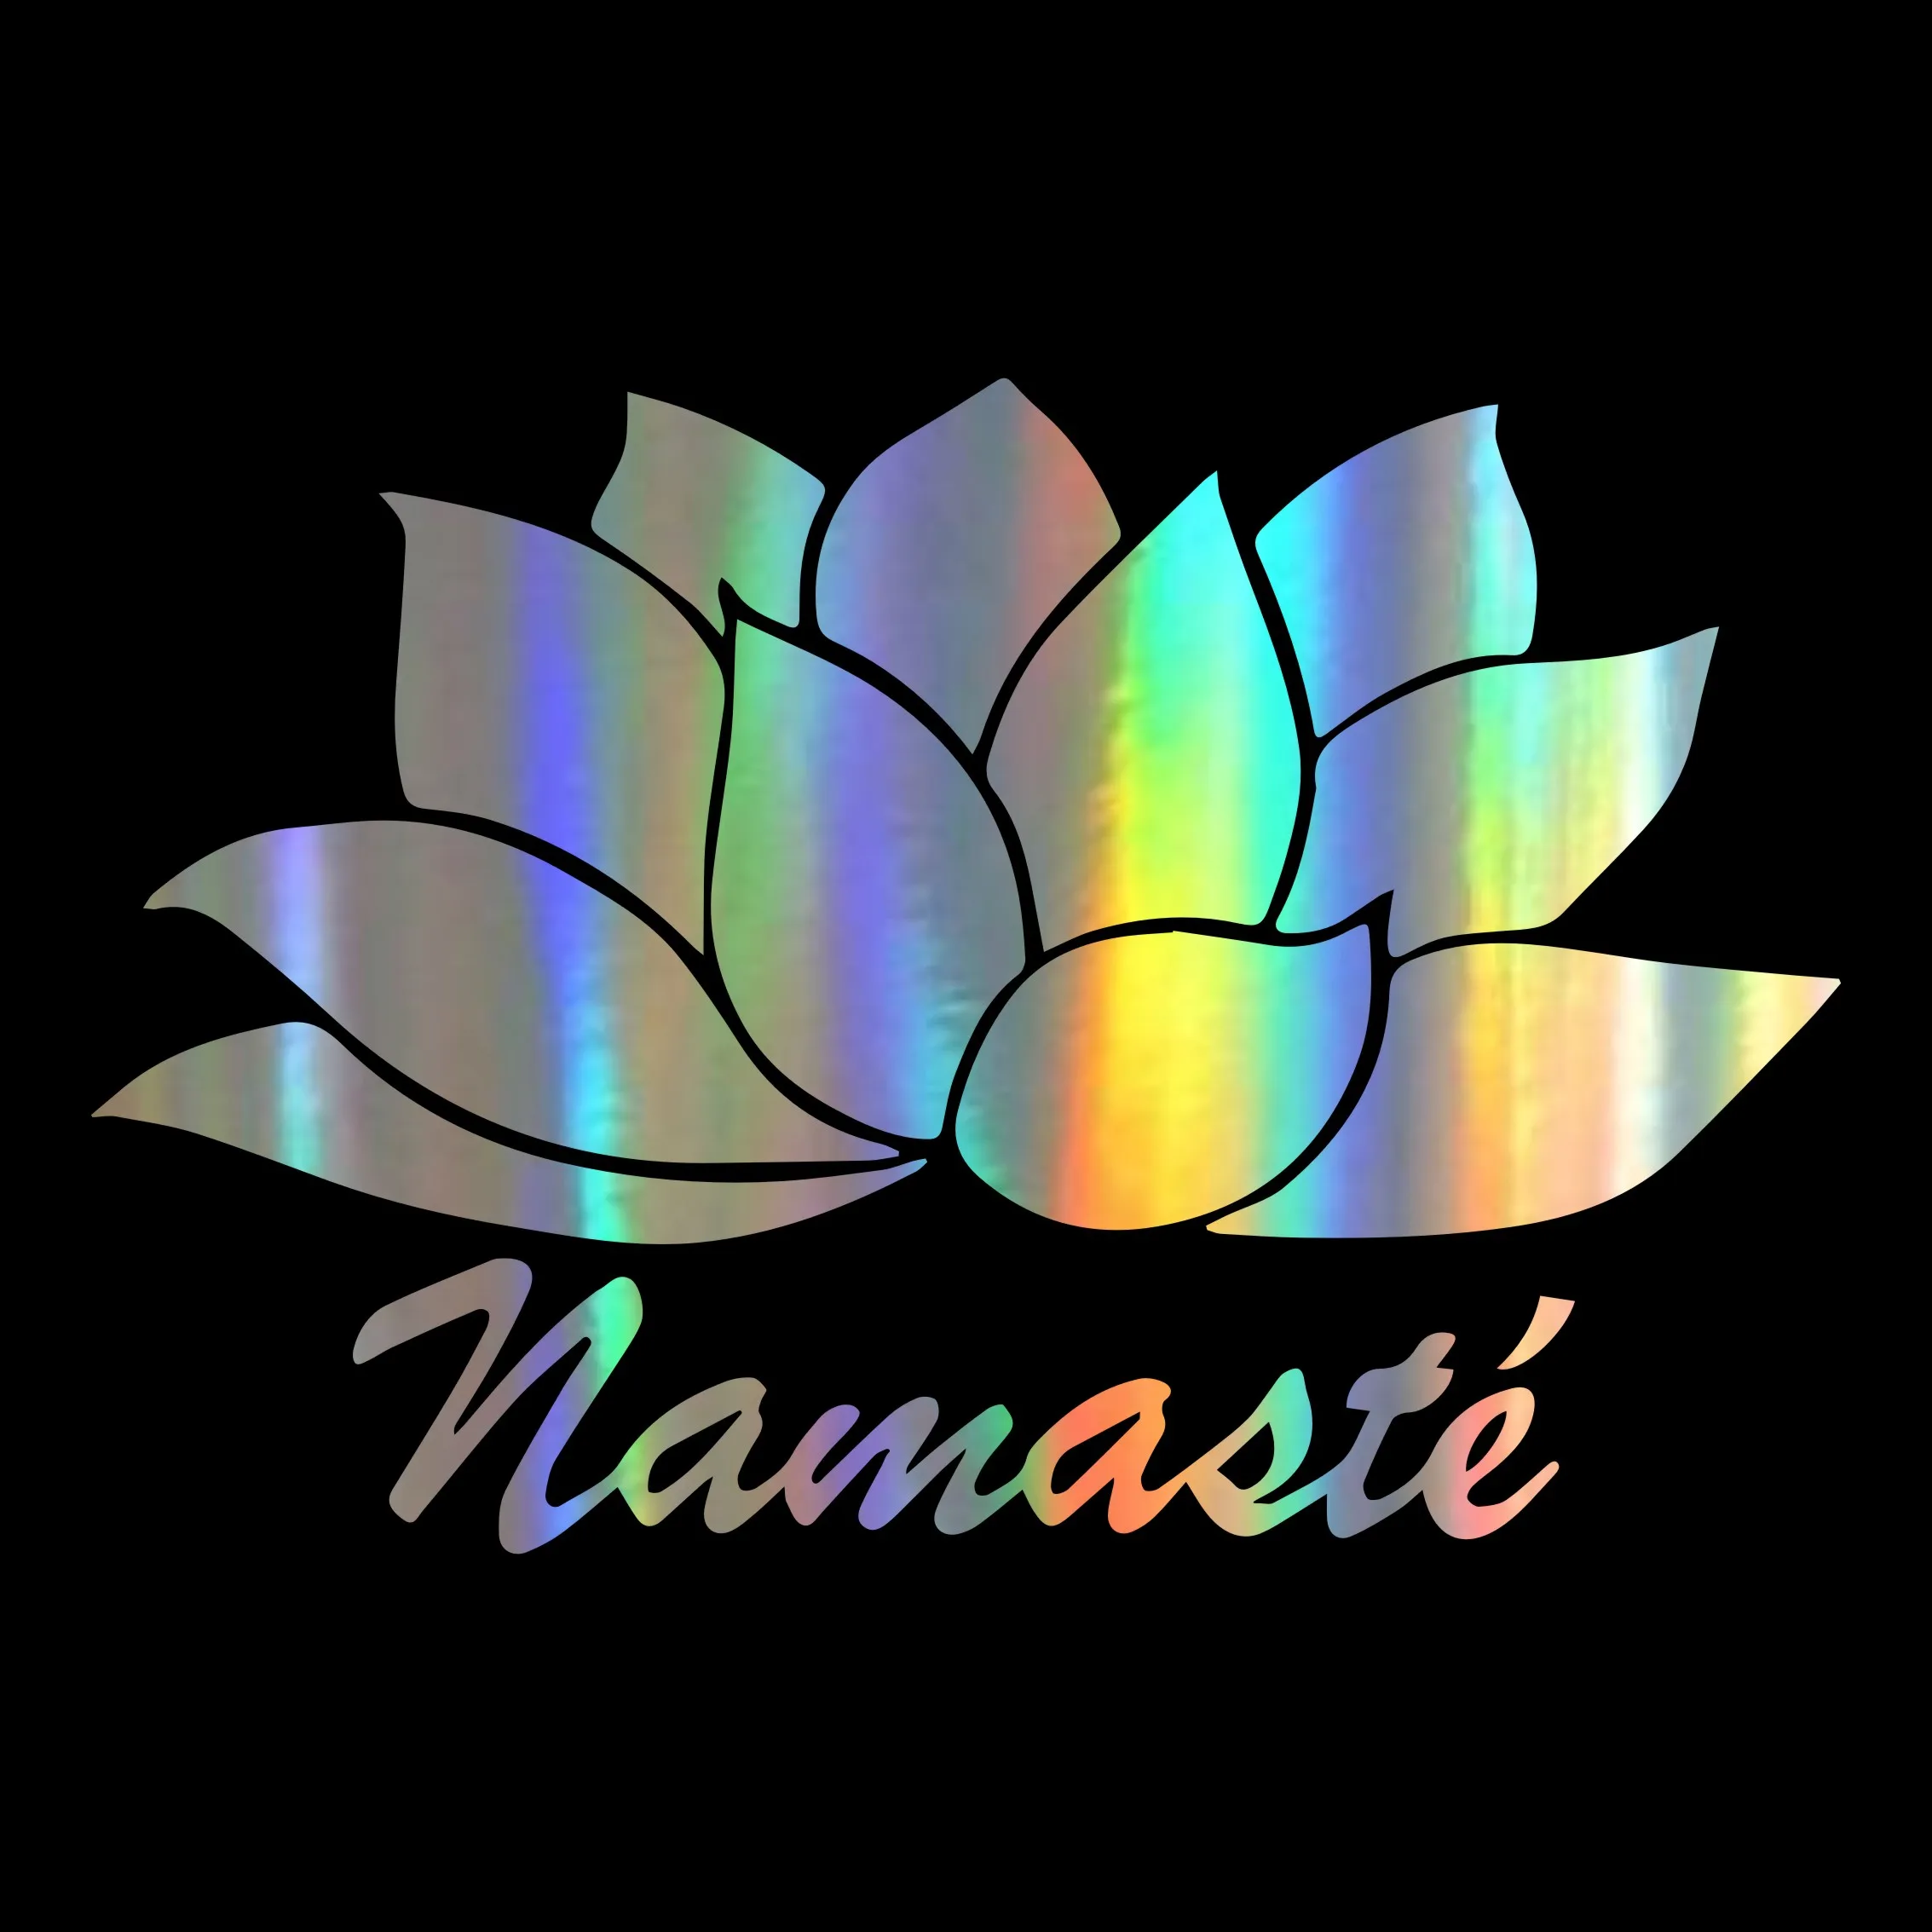 

Namaste Lotus Car Stickers and Decals Funny Quotes Car Styling Bumper Sticker Vinyl Decal for Vehicle Body Door Window 14x9.3CM